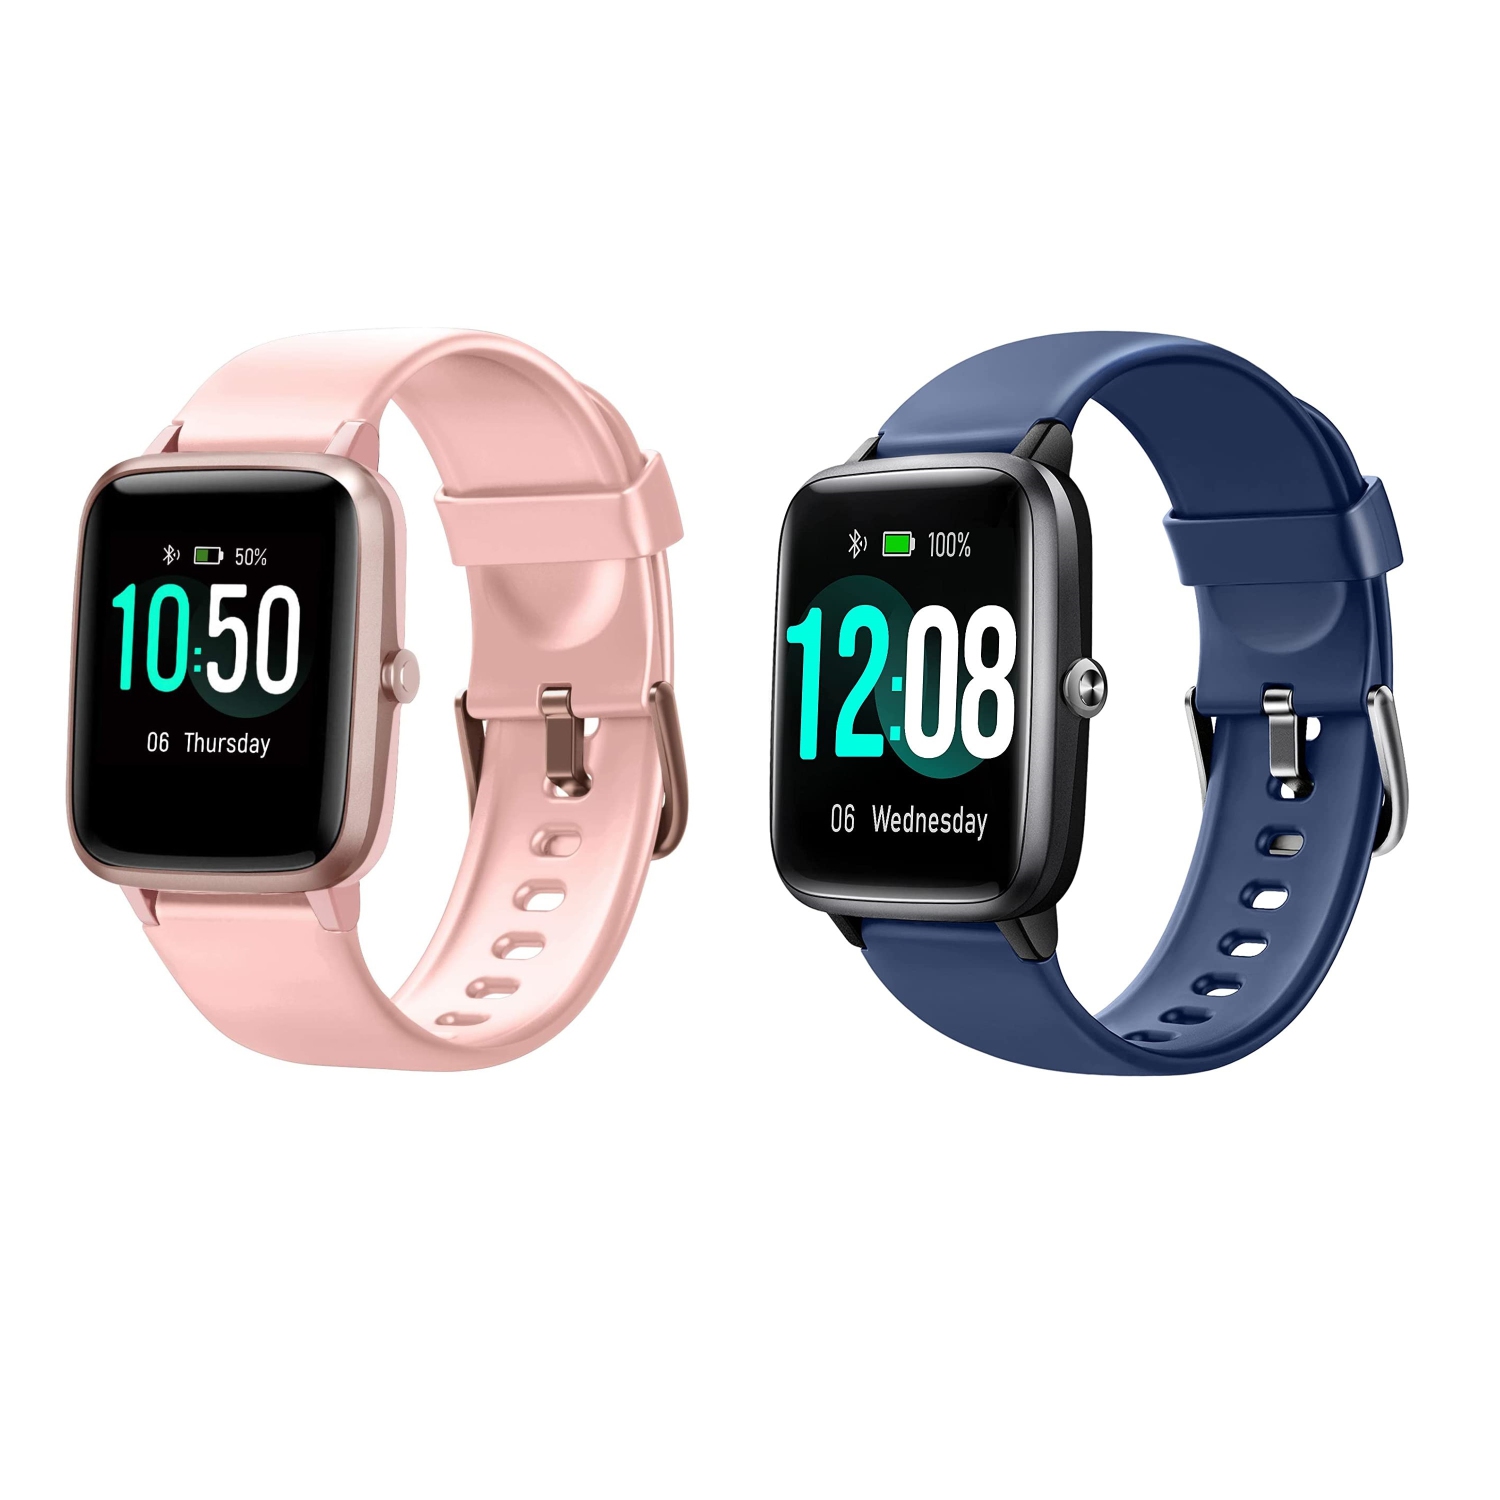 Letscom ID205L Smart Watch and Fitness Tracker with Heart Rate Monitor (2-pack) by Letsfit - Blue & Pink